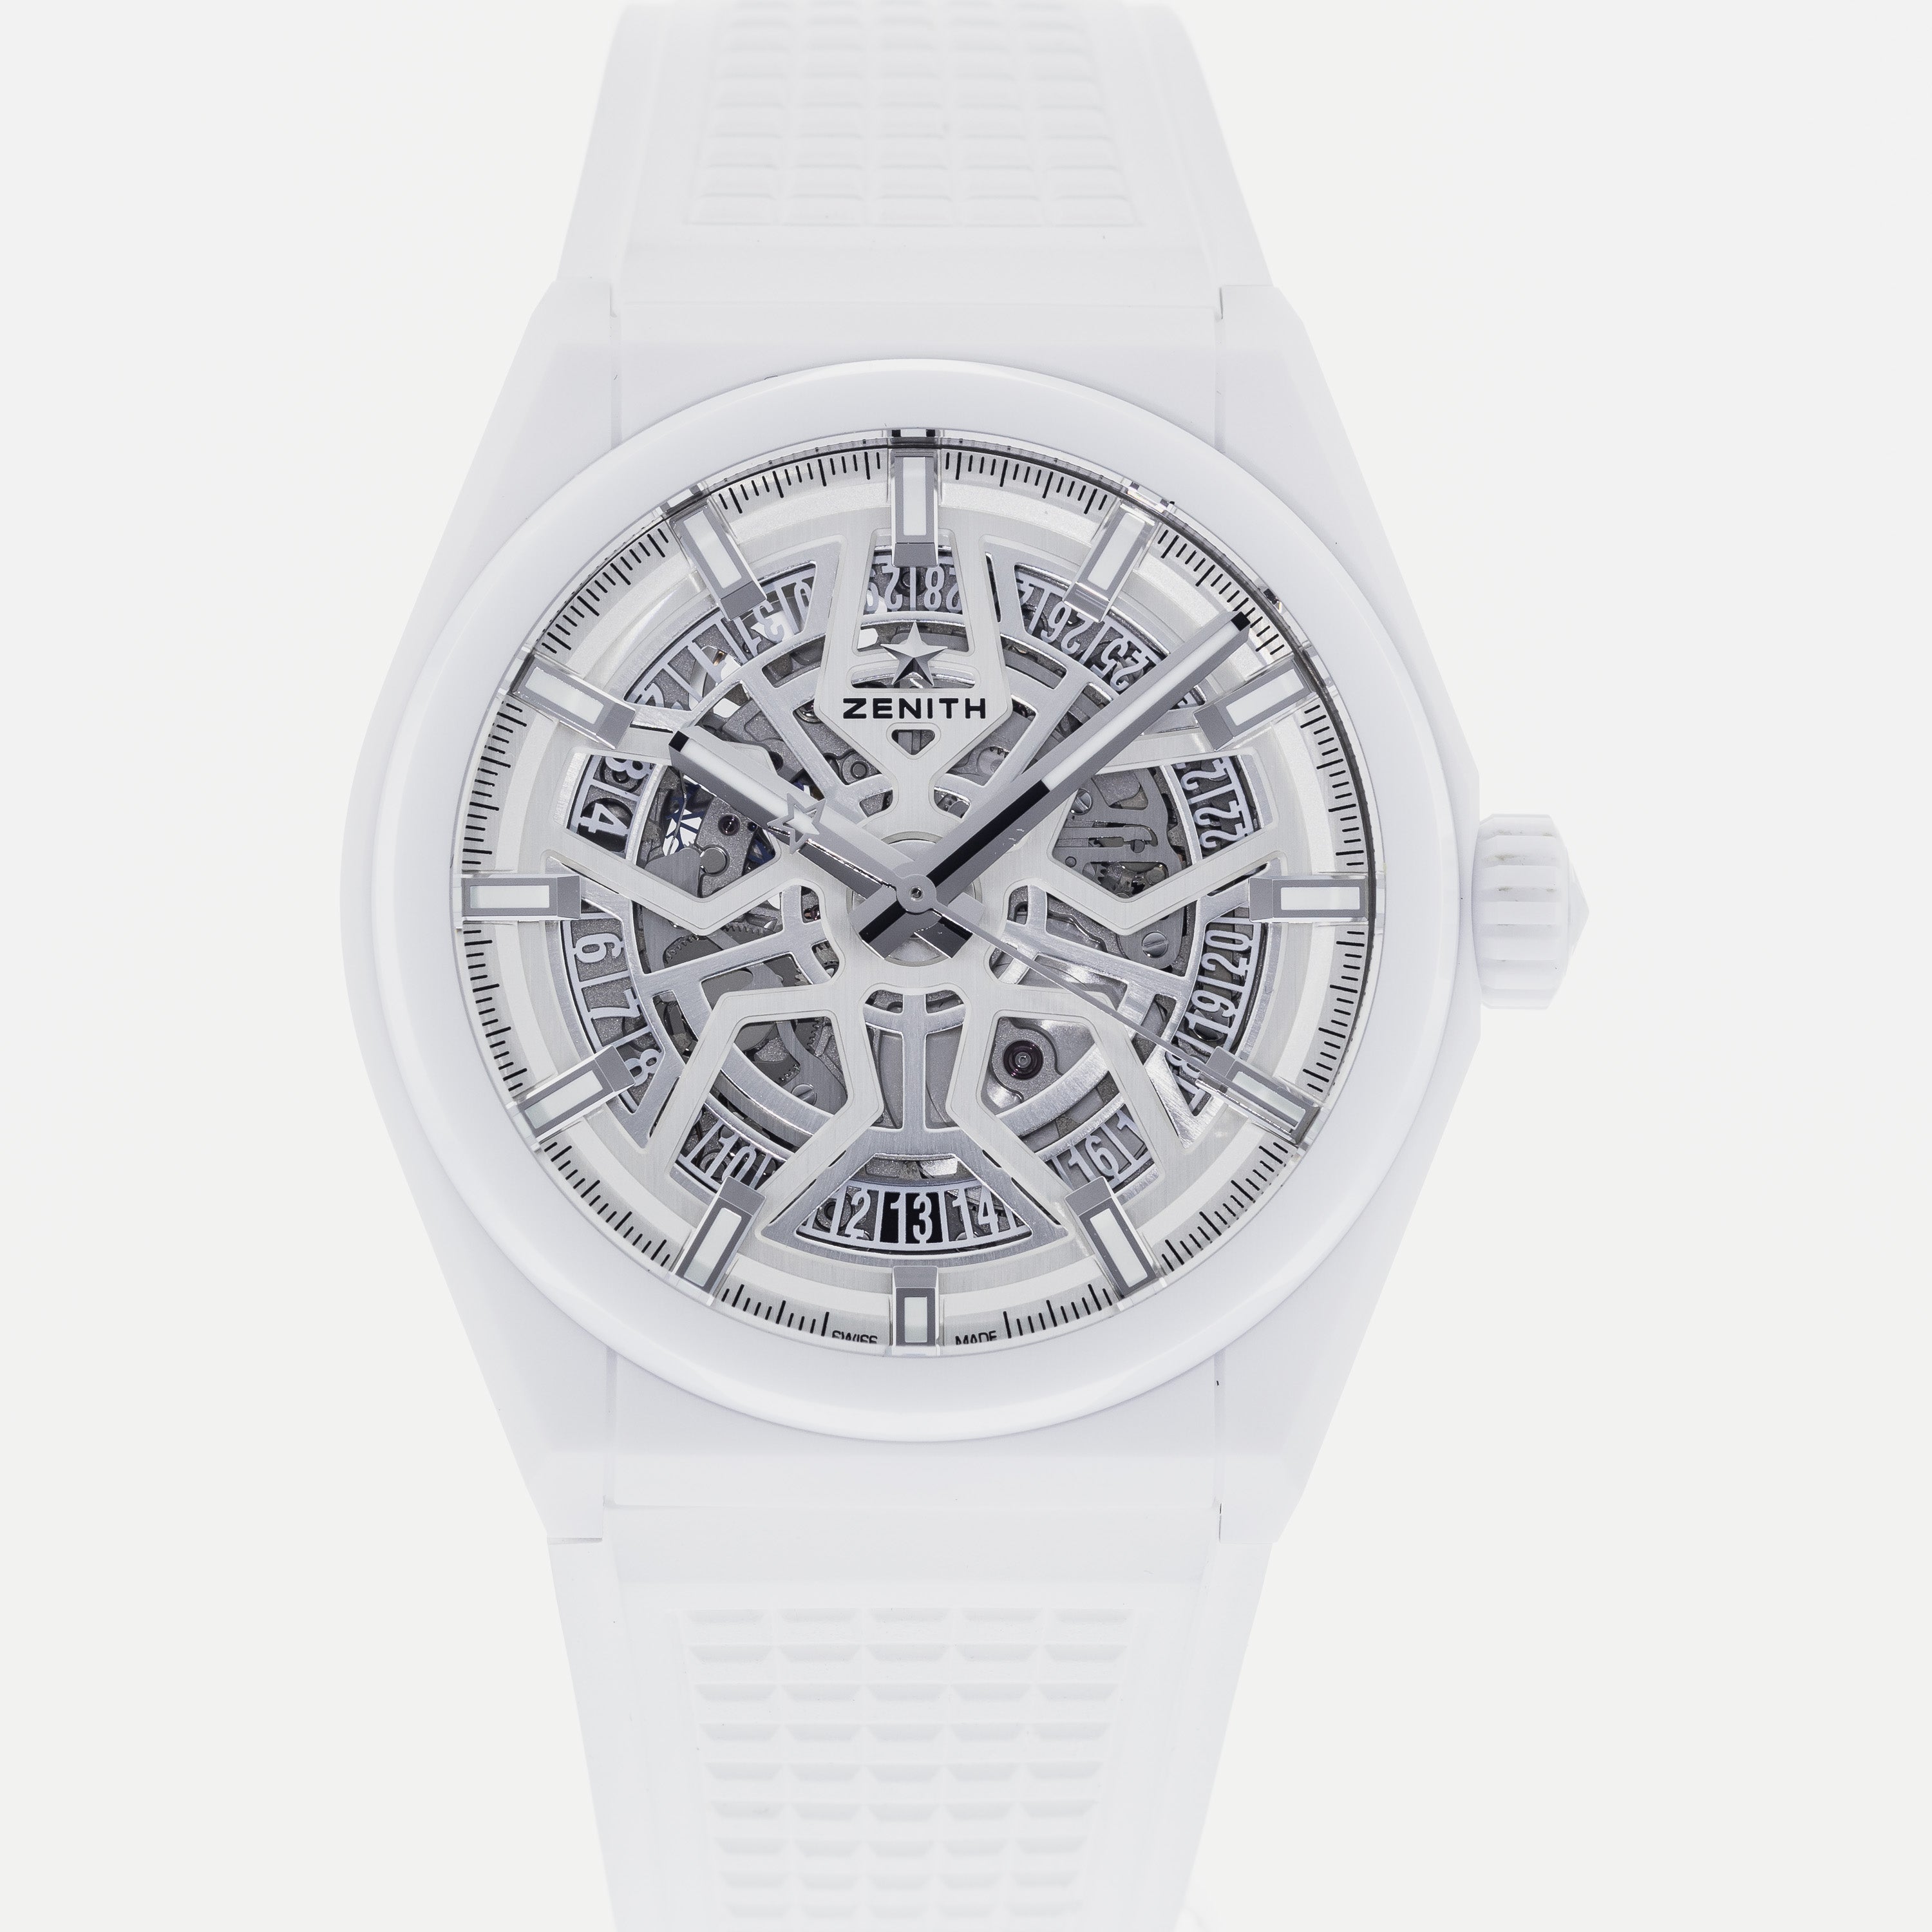 Owner Review: Zenith Defy Classic - More than a Thousand Pictures